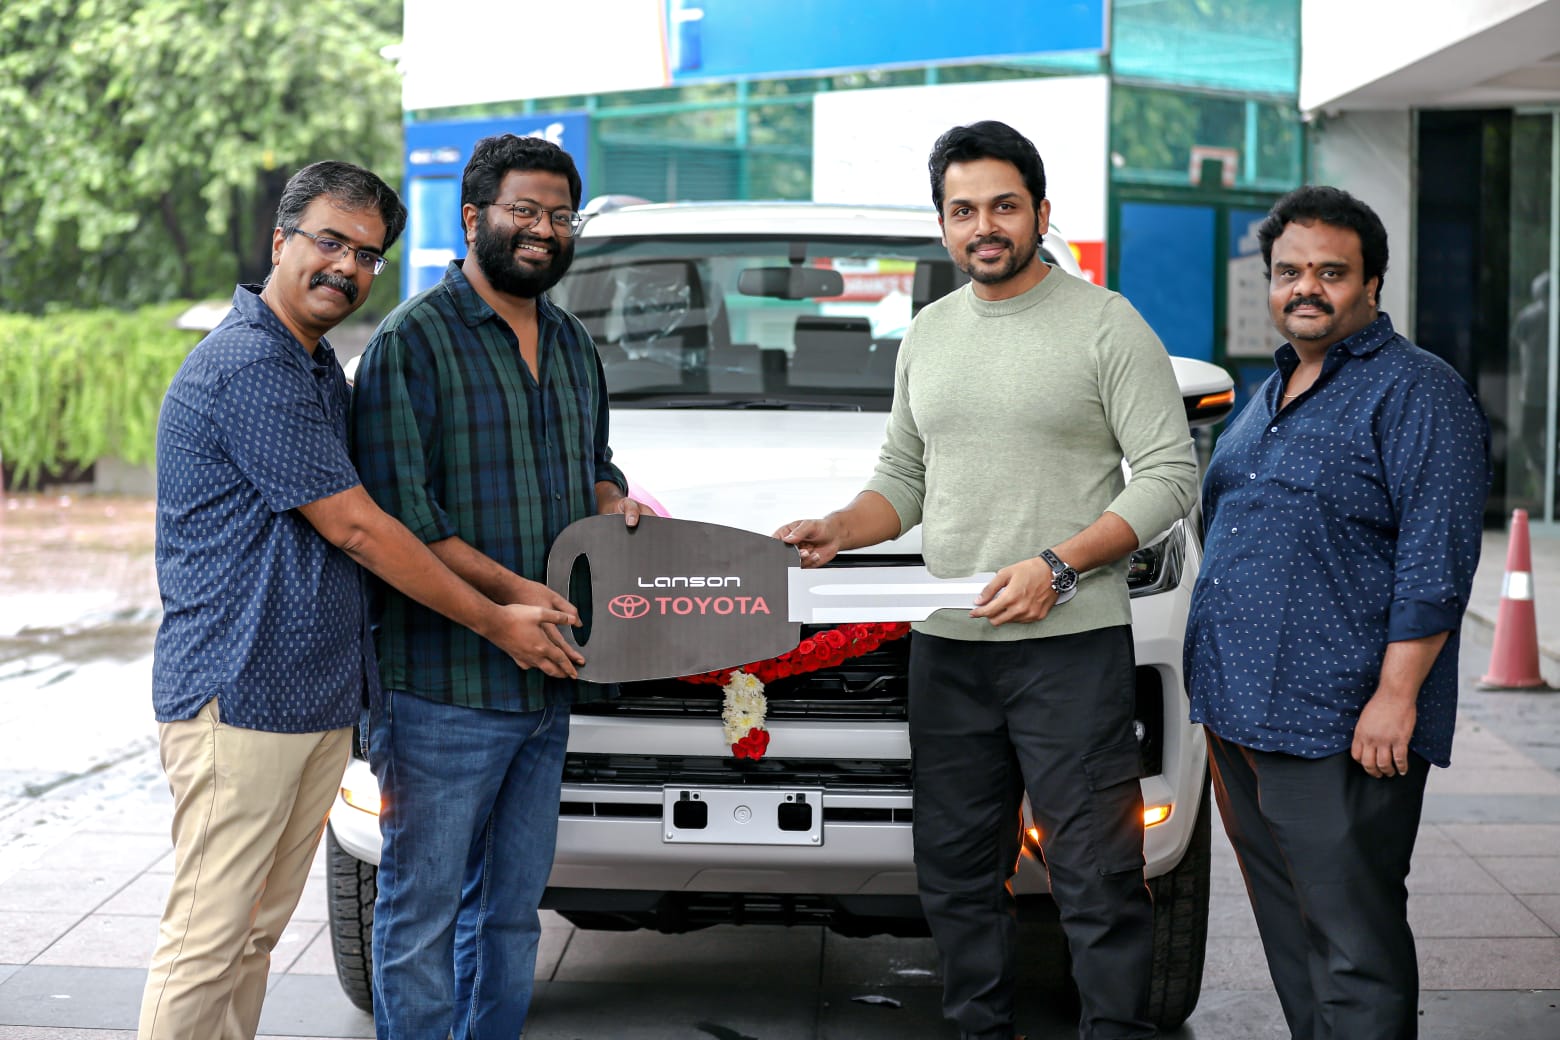 Sardar Producer presented a Toyota Fortuner car to Director Ps mithran 